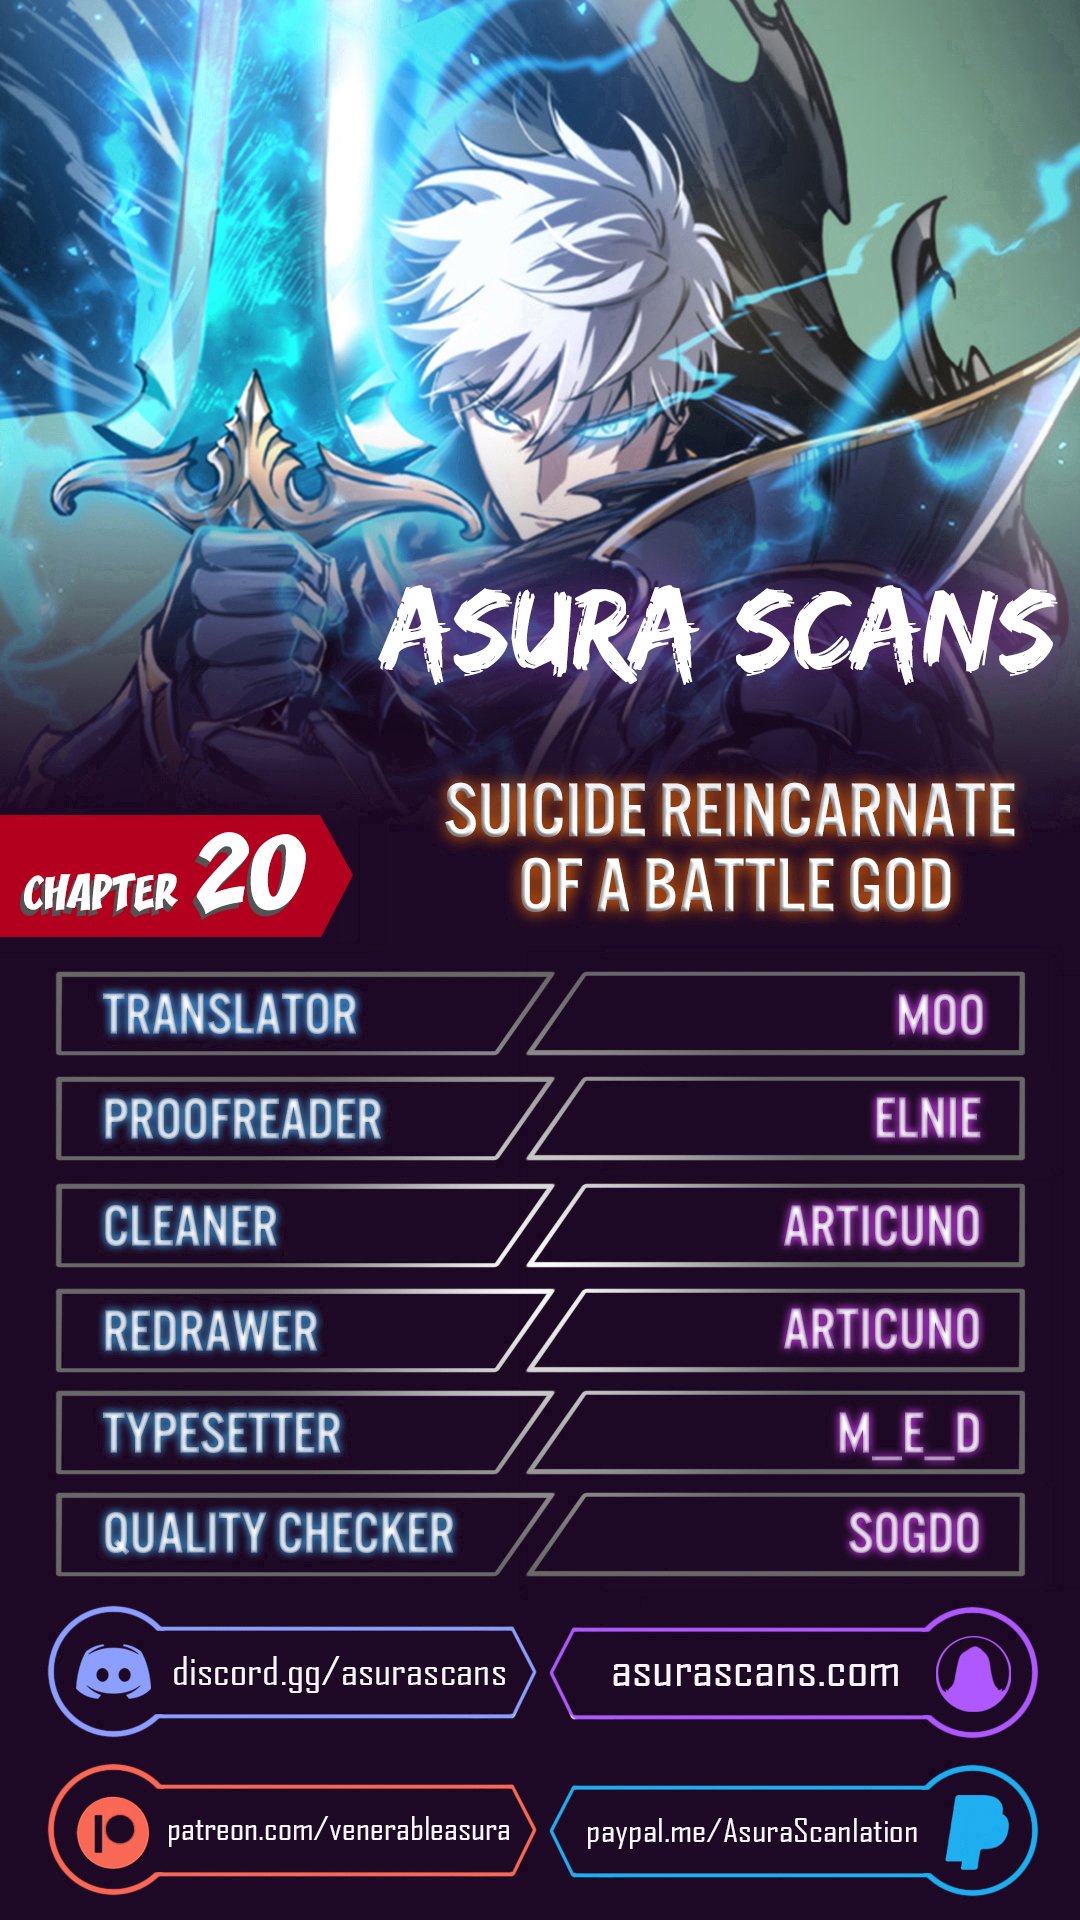 Reincarnation of the Suicidal Battle God - Chapter 20344 - Page 1